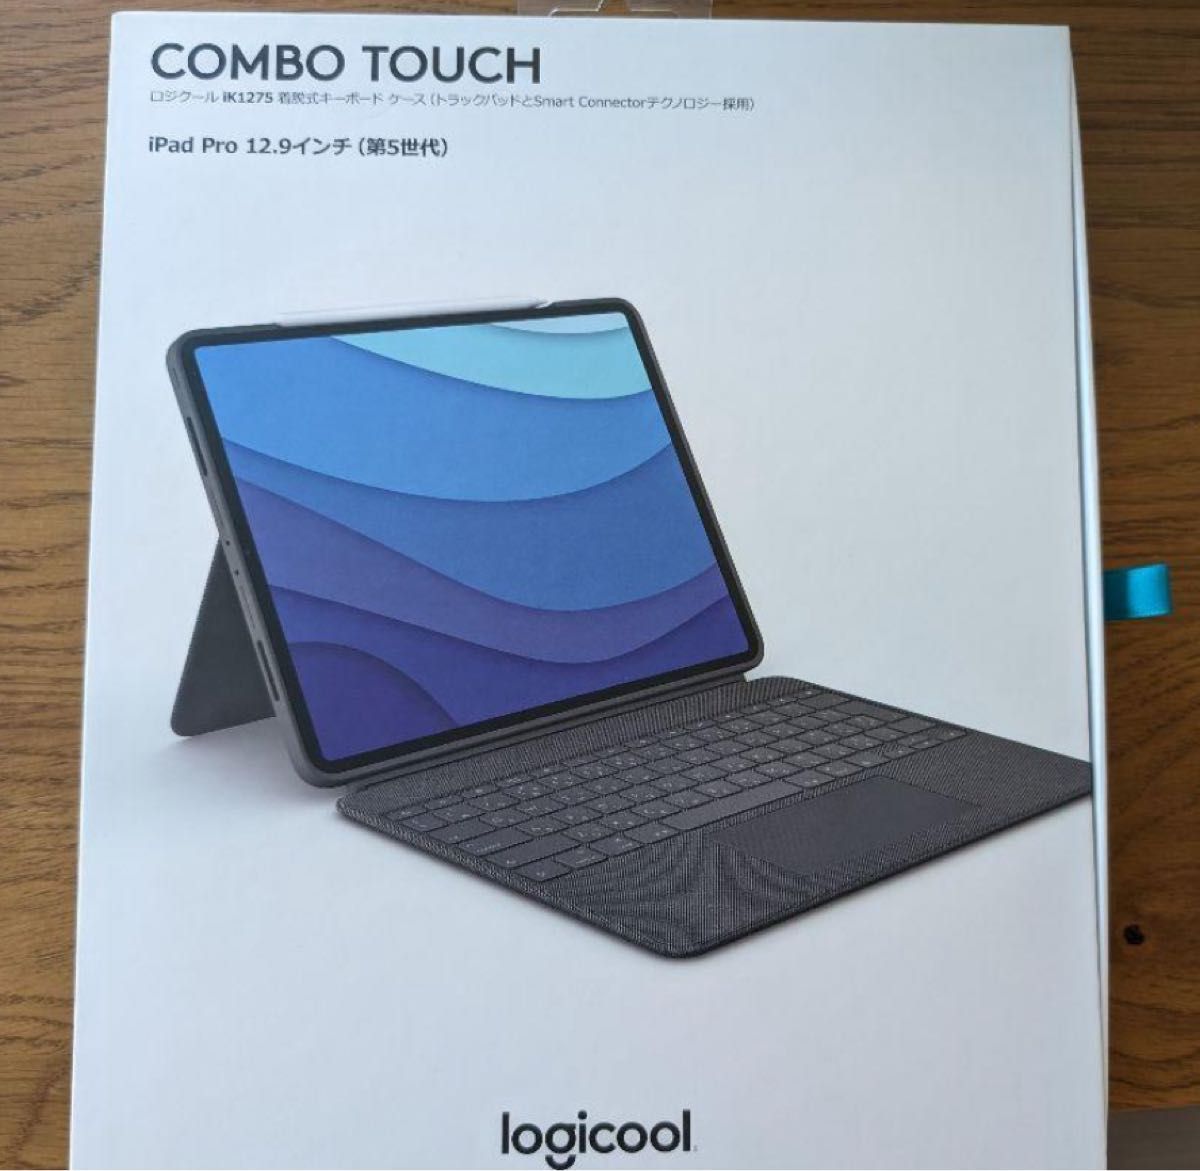 Logicool Combo Touch 12.9